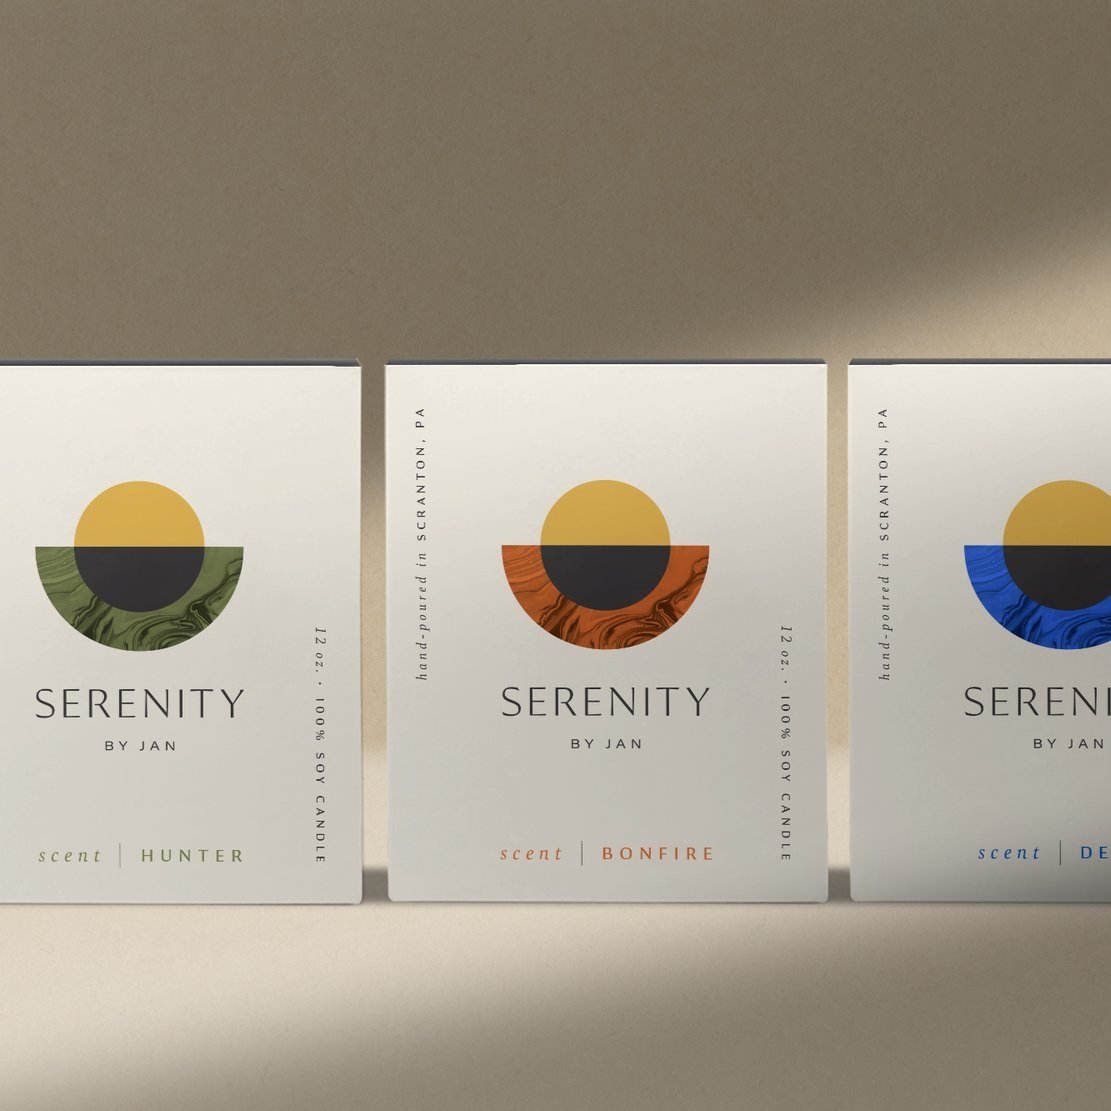 Serenity candle Line up 2 2.jpg